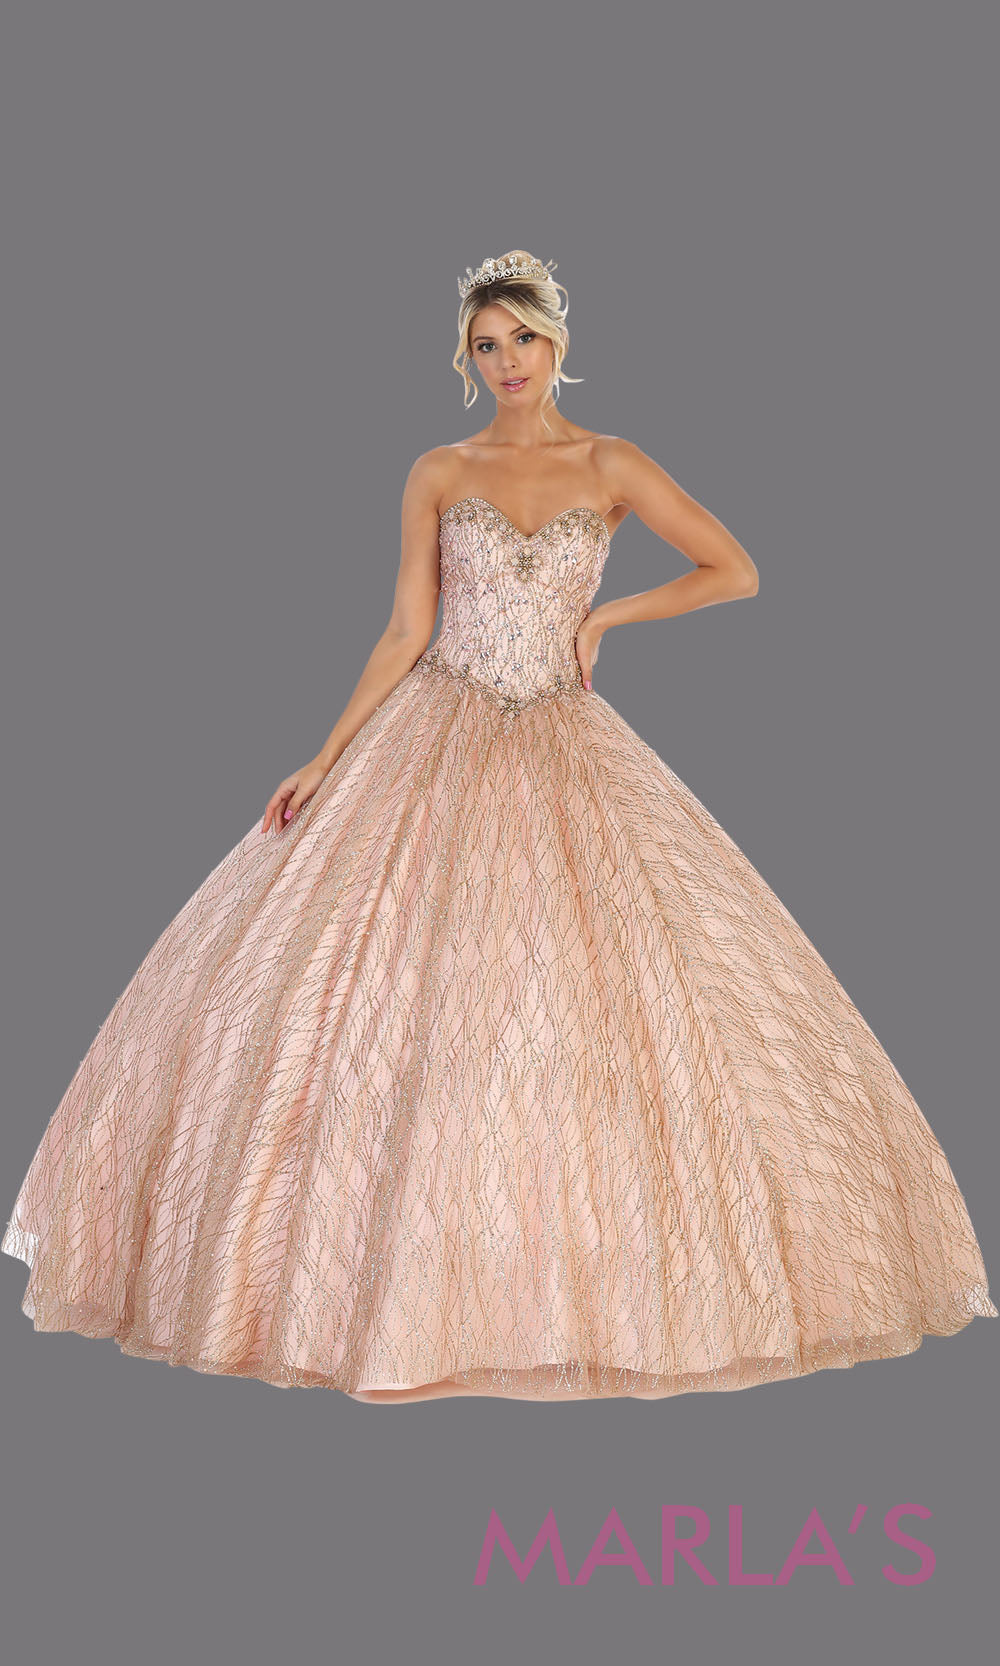 Long rose gold princess quinceanera strapless ball gown. Perfect for pink gold Engagement ballgown dress, Quinceanera, Sweet 16, Sweet 15, Debut and pink champagne Wedding bridal Reception Dress. Available in plus sizes.